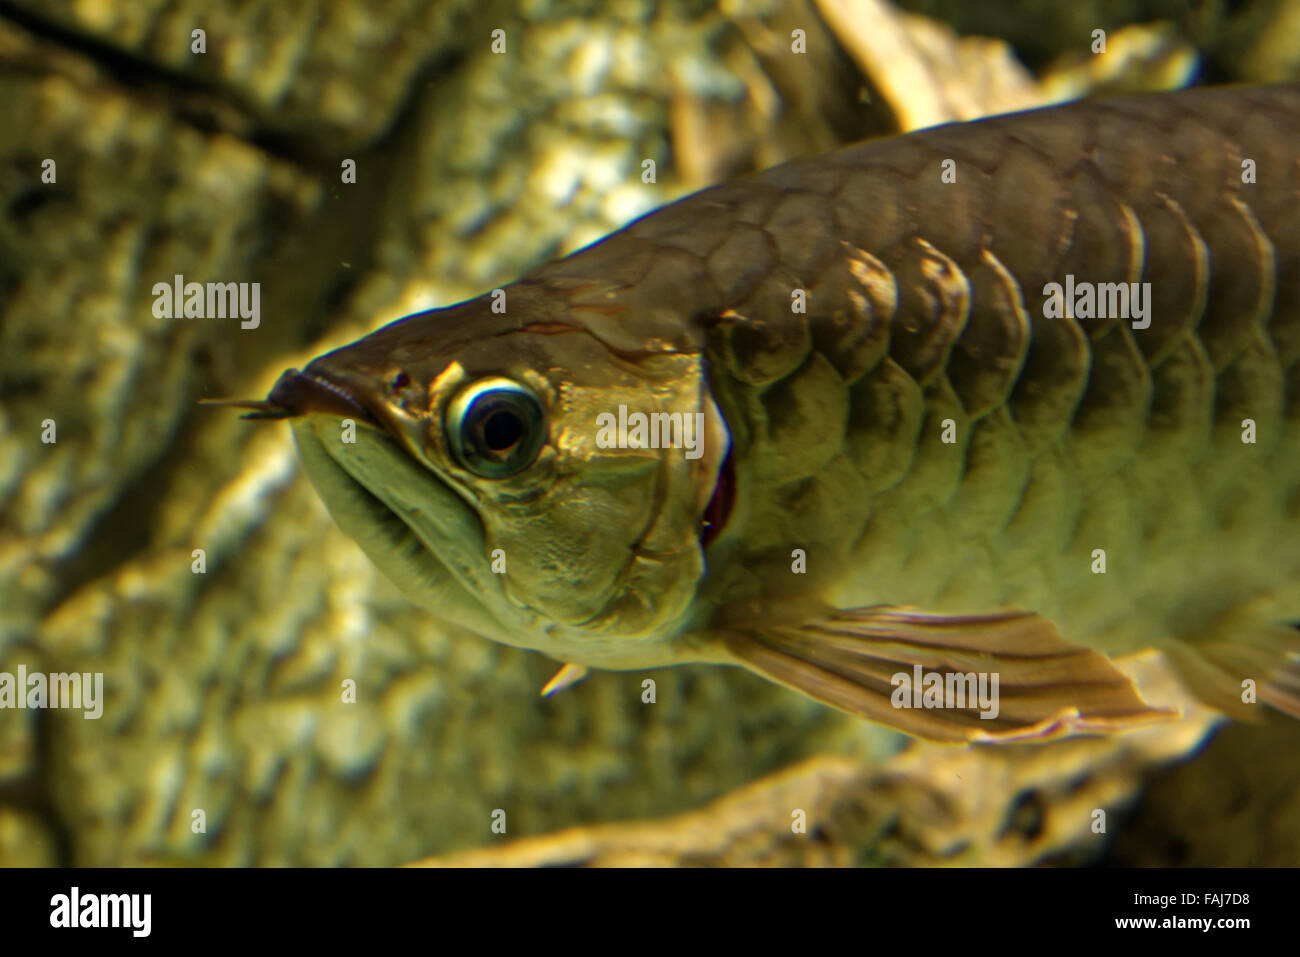 Asian arowana (Scleropages formosus) comprises several phenotypic varieties of freshwater fish. Stock Photo